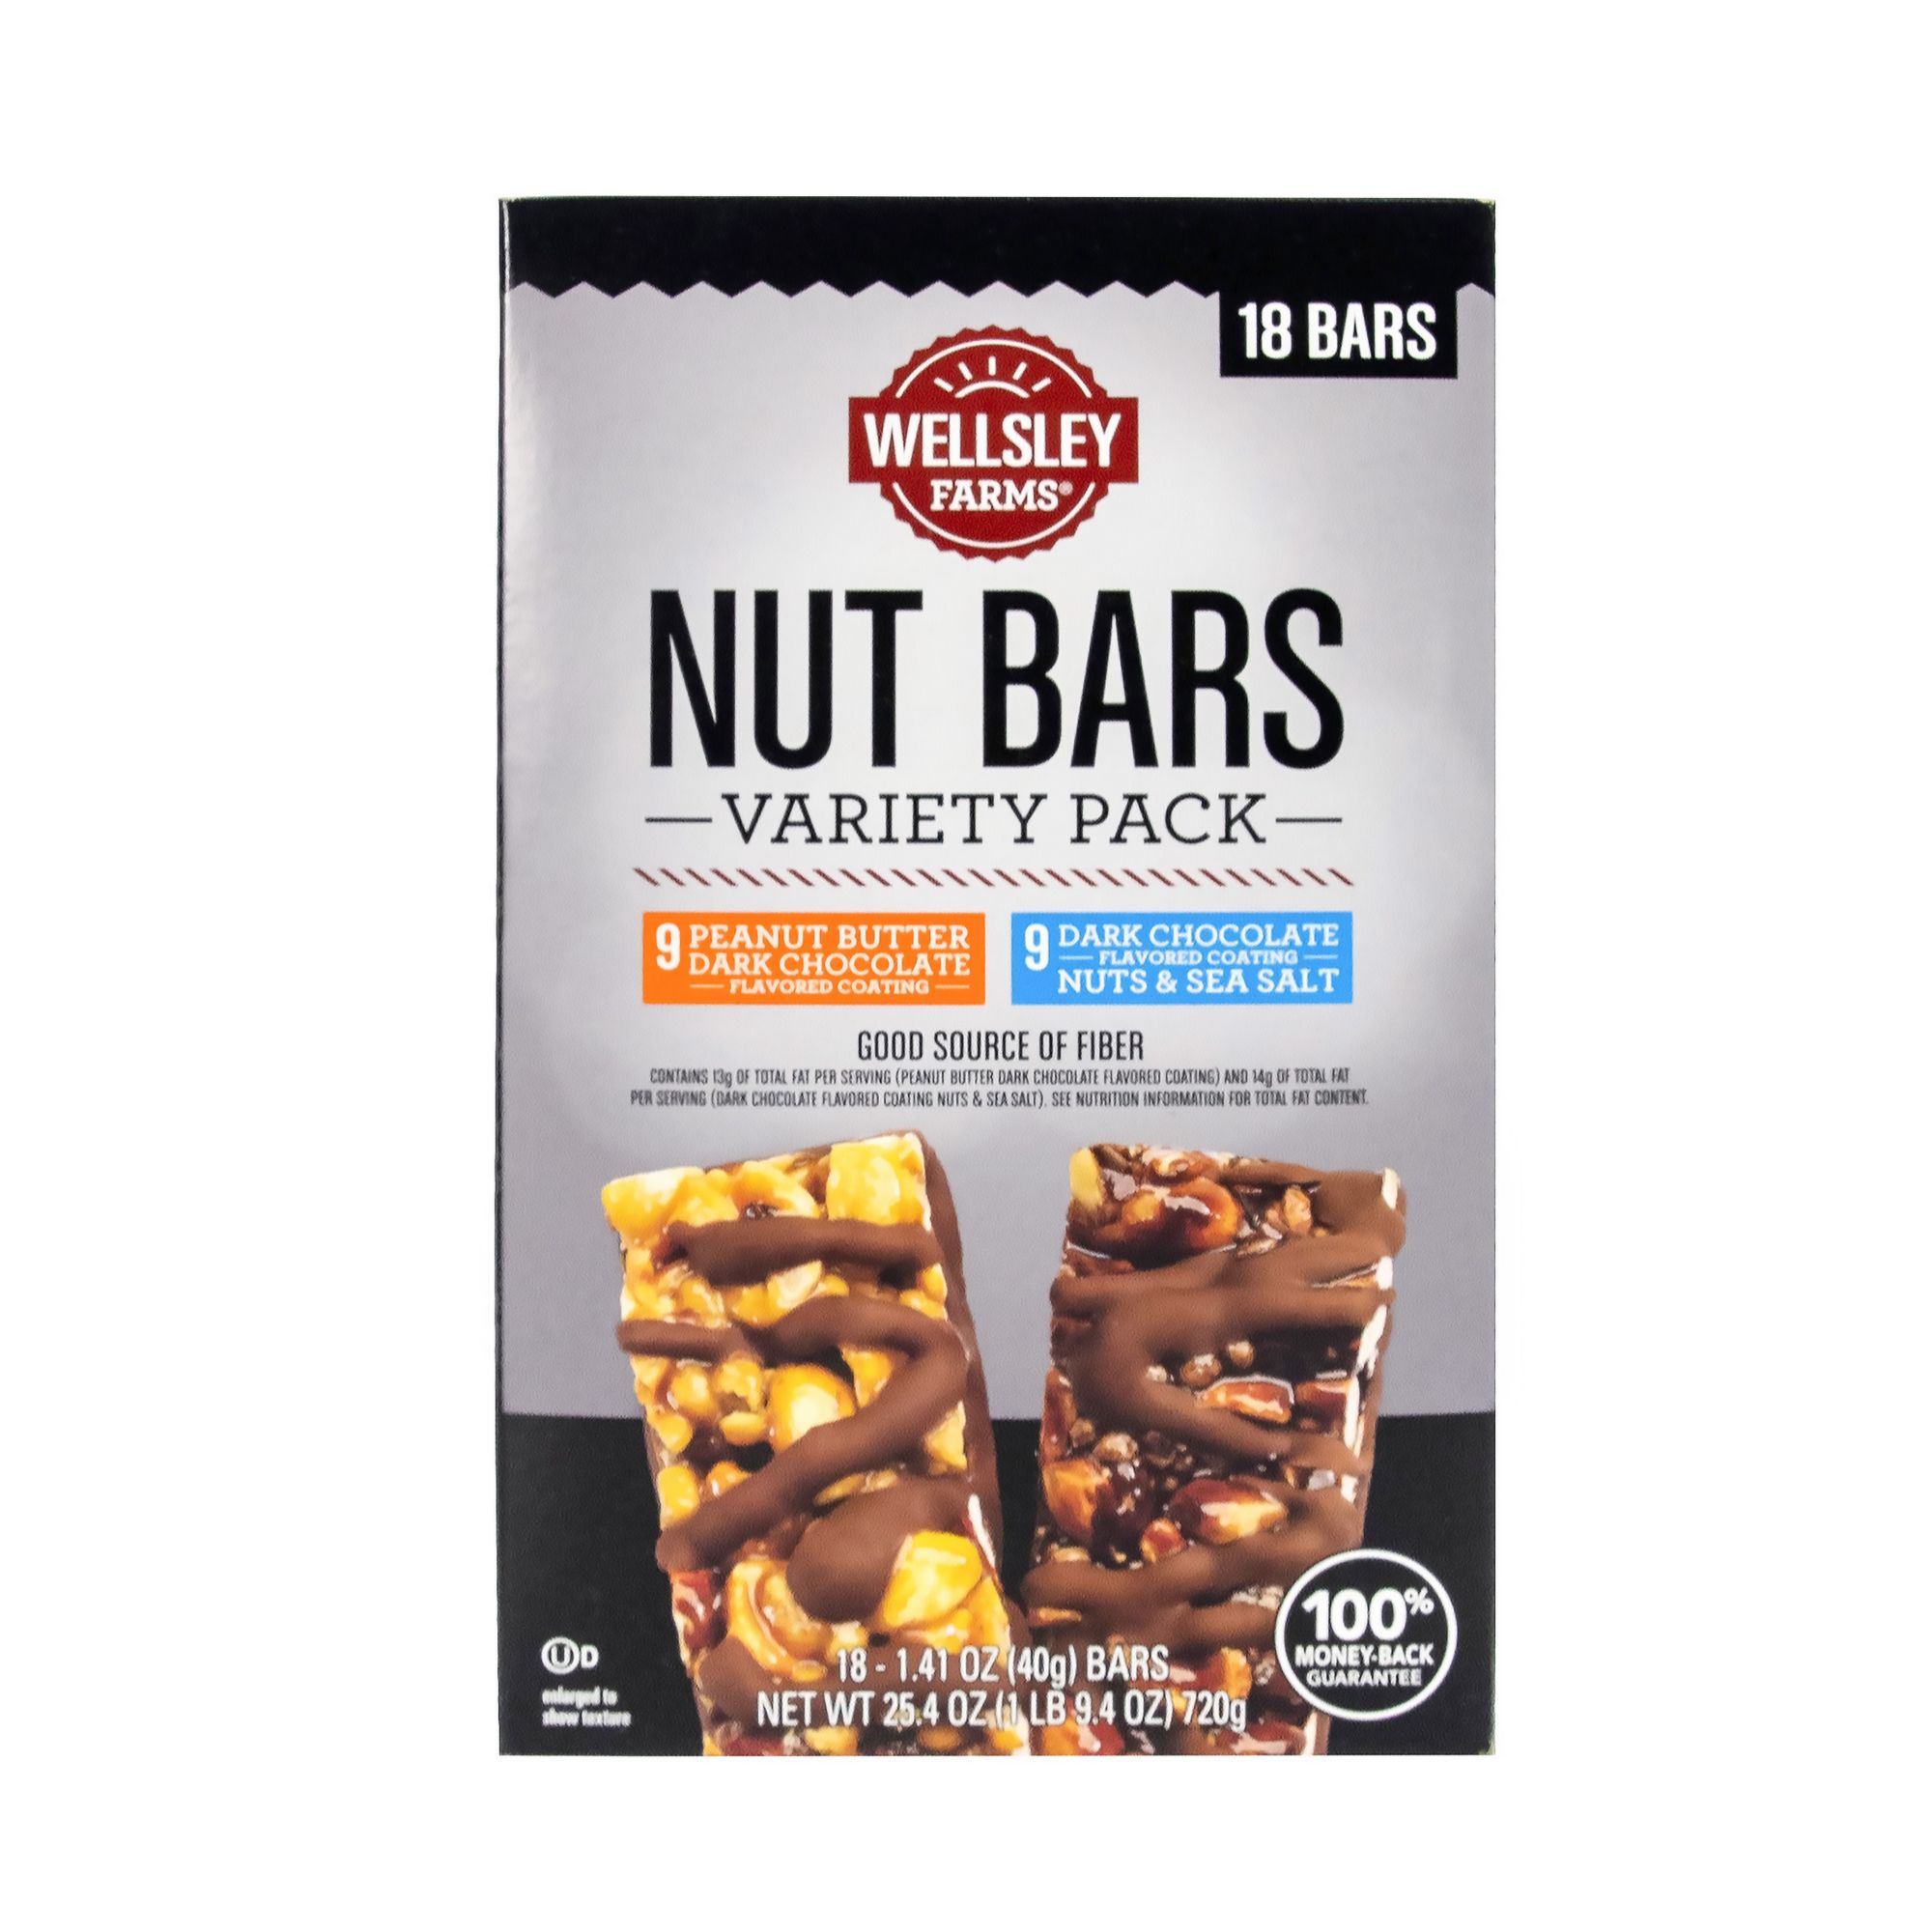  Nakd Bars, Cocoa Orange Raw Fruit and Nuts, Gluten Free, Vegan,  18 Count: Granola And Trail Mix Bars